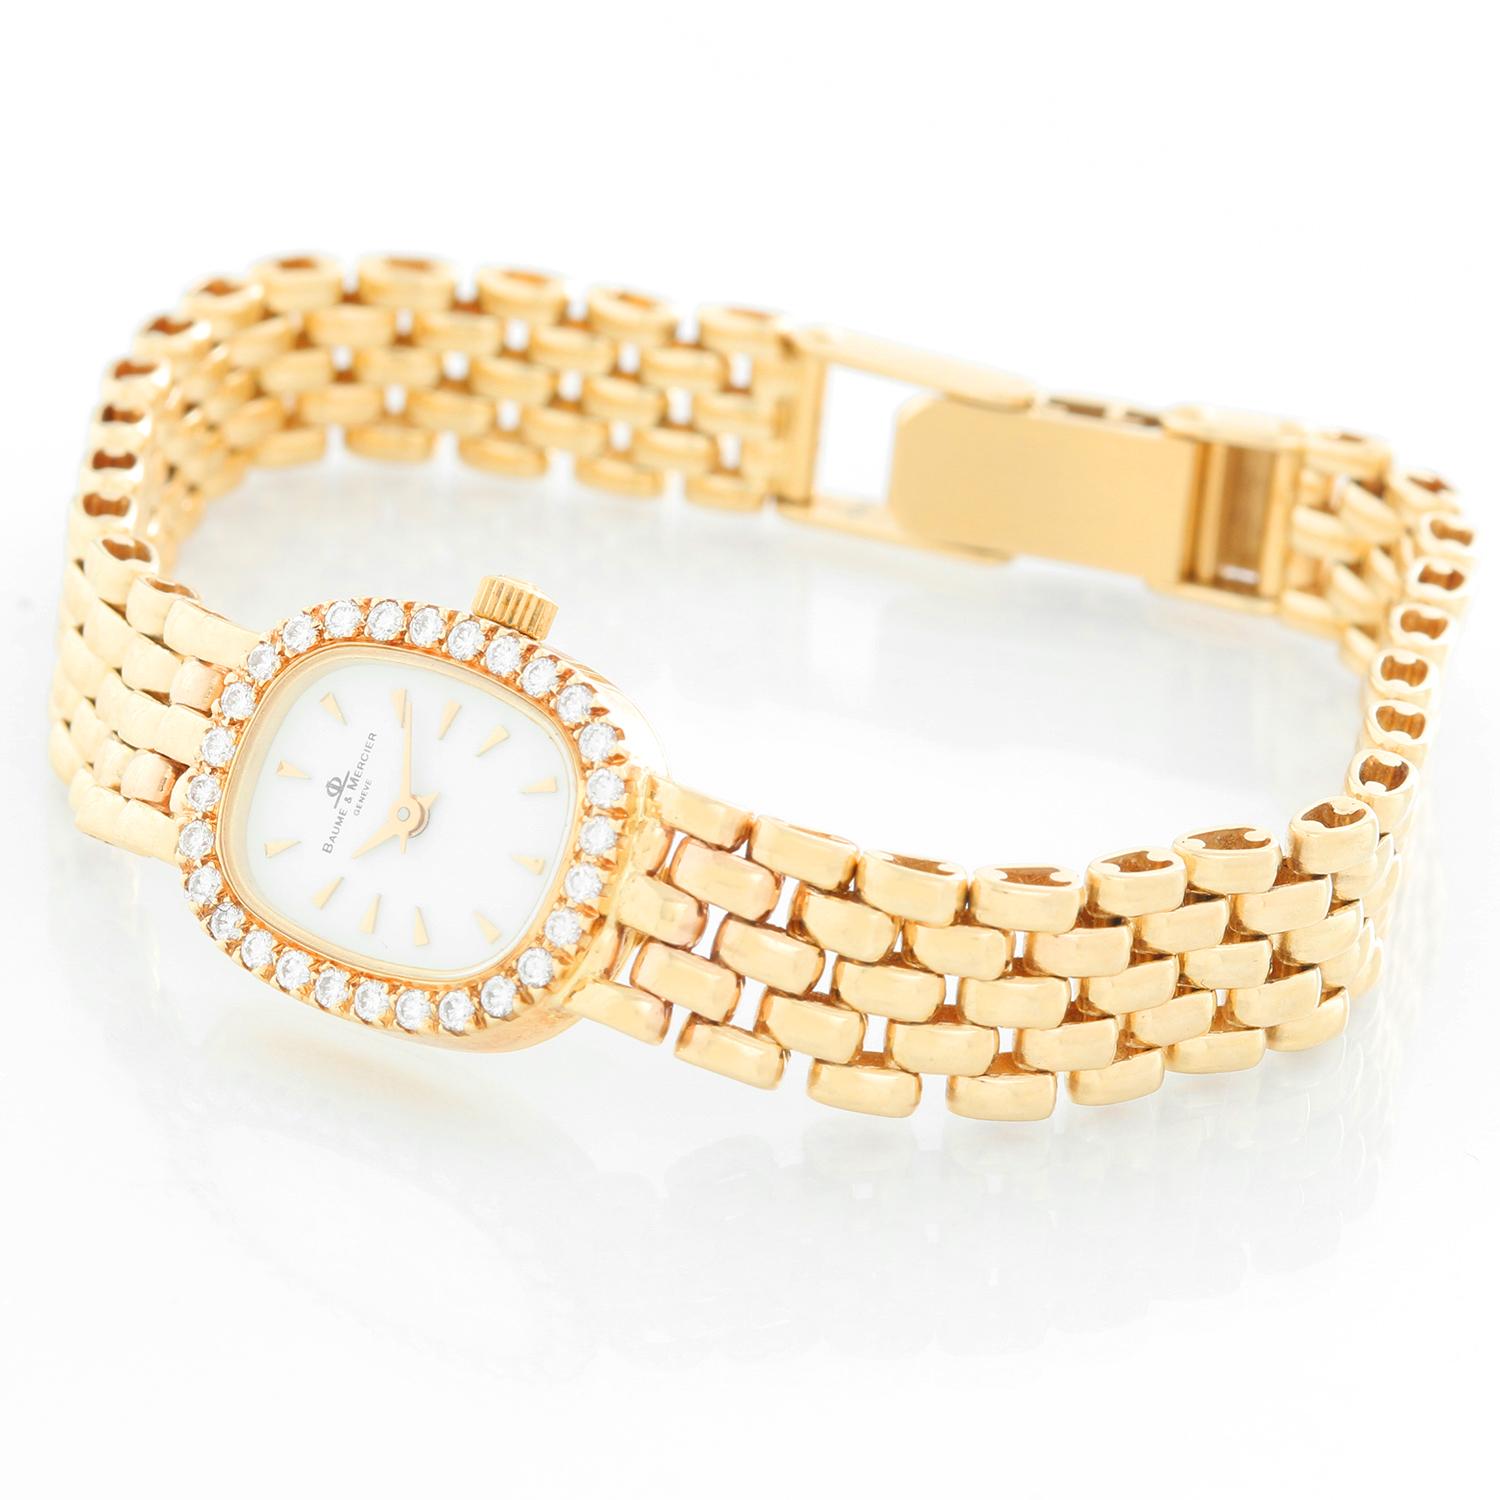 Baume & Mercier 18K Yellow Gold Diamond Watch - Quartz. 18K Yellow gold with diamonds on bezel ( 24 mm ). White dial with raised gold Roman numerals. 18K Yellow gold link bracelet; Will fit a 7 inch wrist . Pre-owned with custom box.